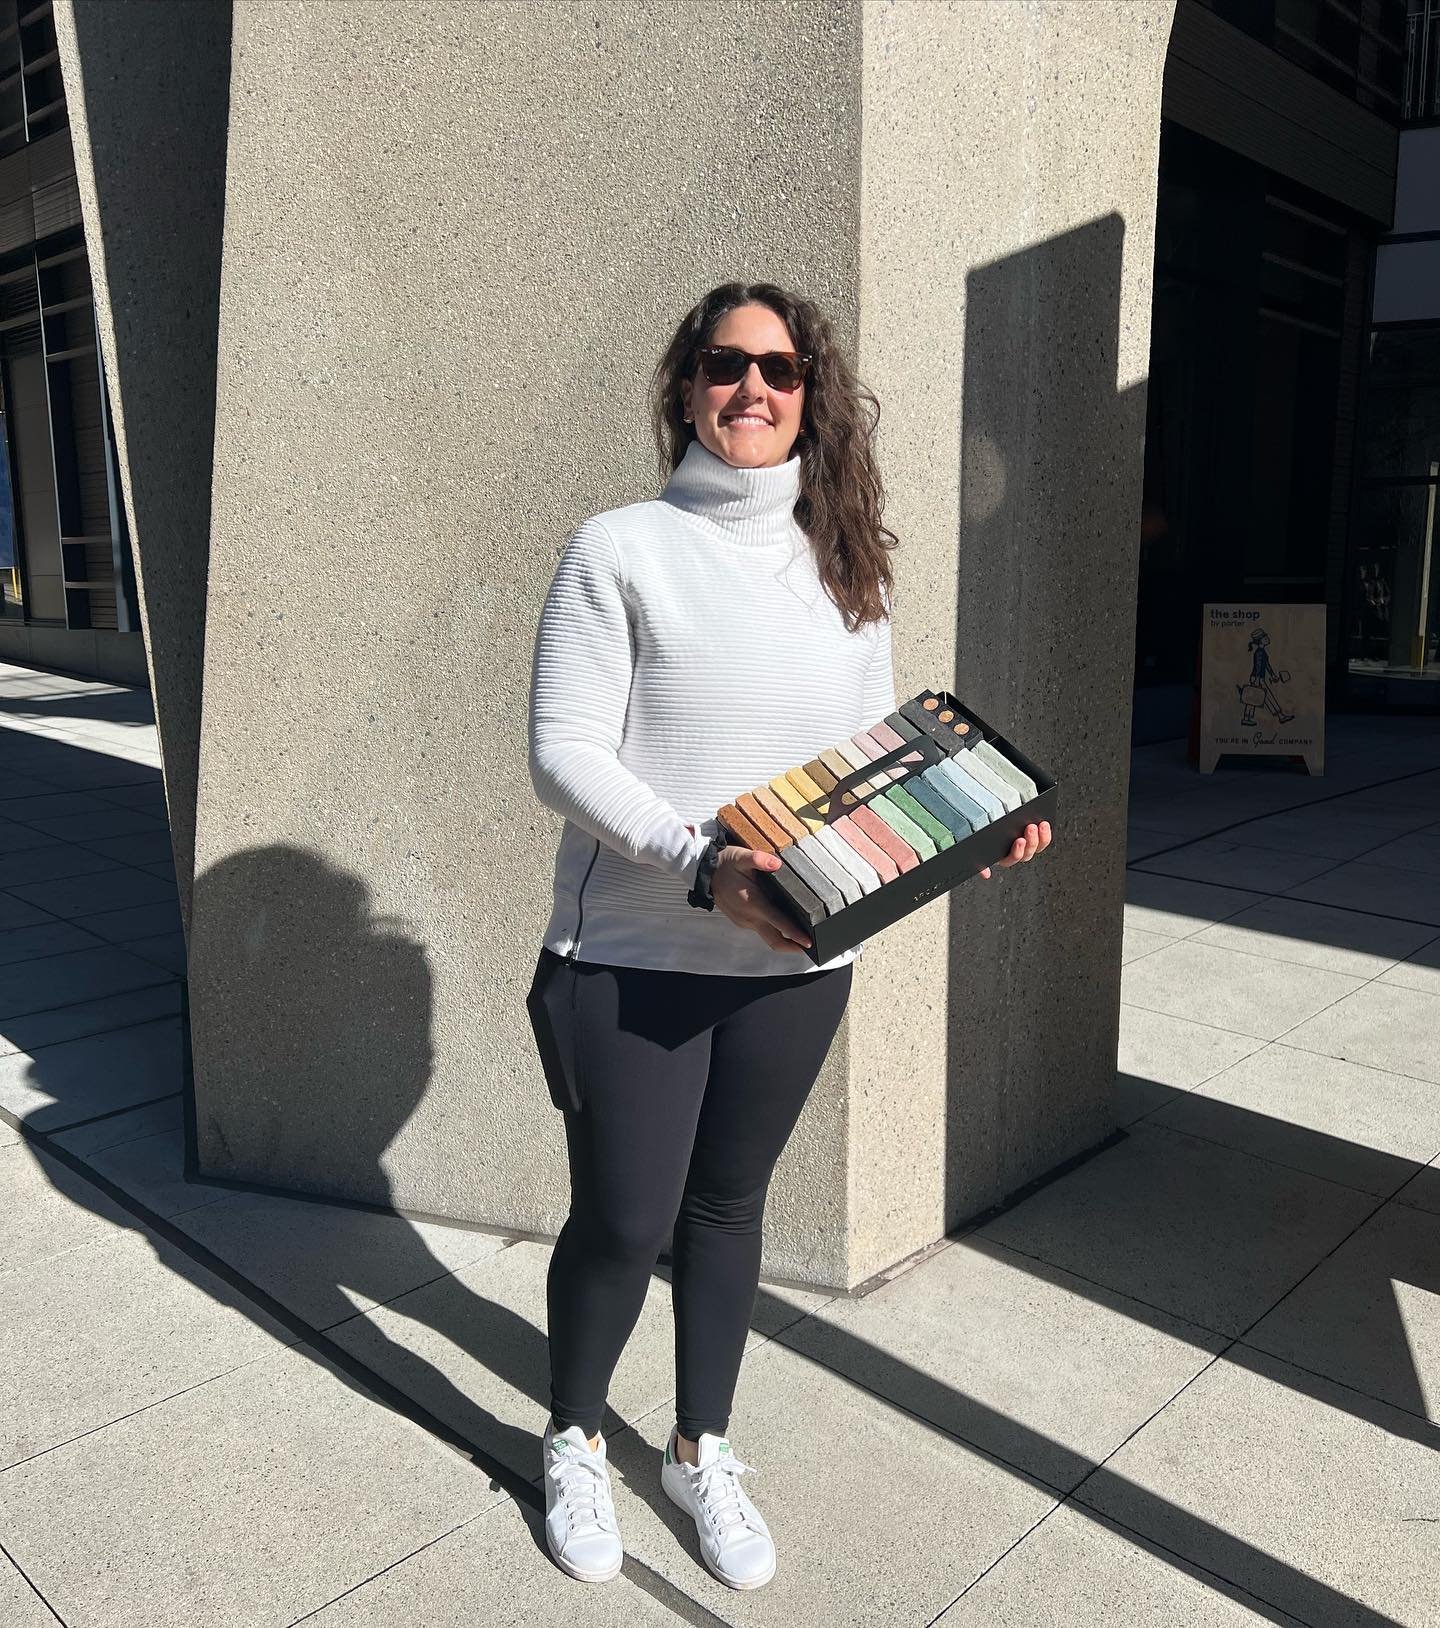 Spent this Earth Day delivering samples of the most sustainable product I&rsquo;ve ever represented - fully circular Archisonic Cotton by @impactacoustic. I&rsquo;m proud to partner with lines that value sustainable design, manufacturing and first an